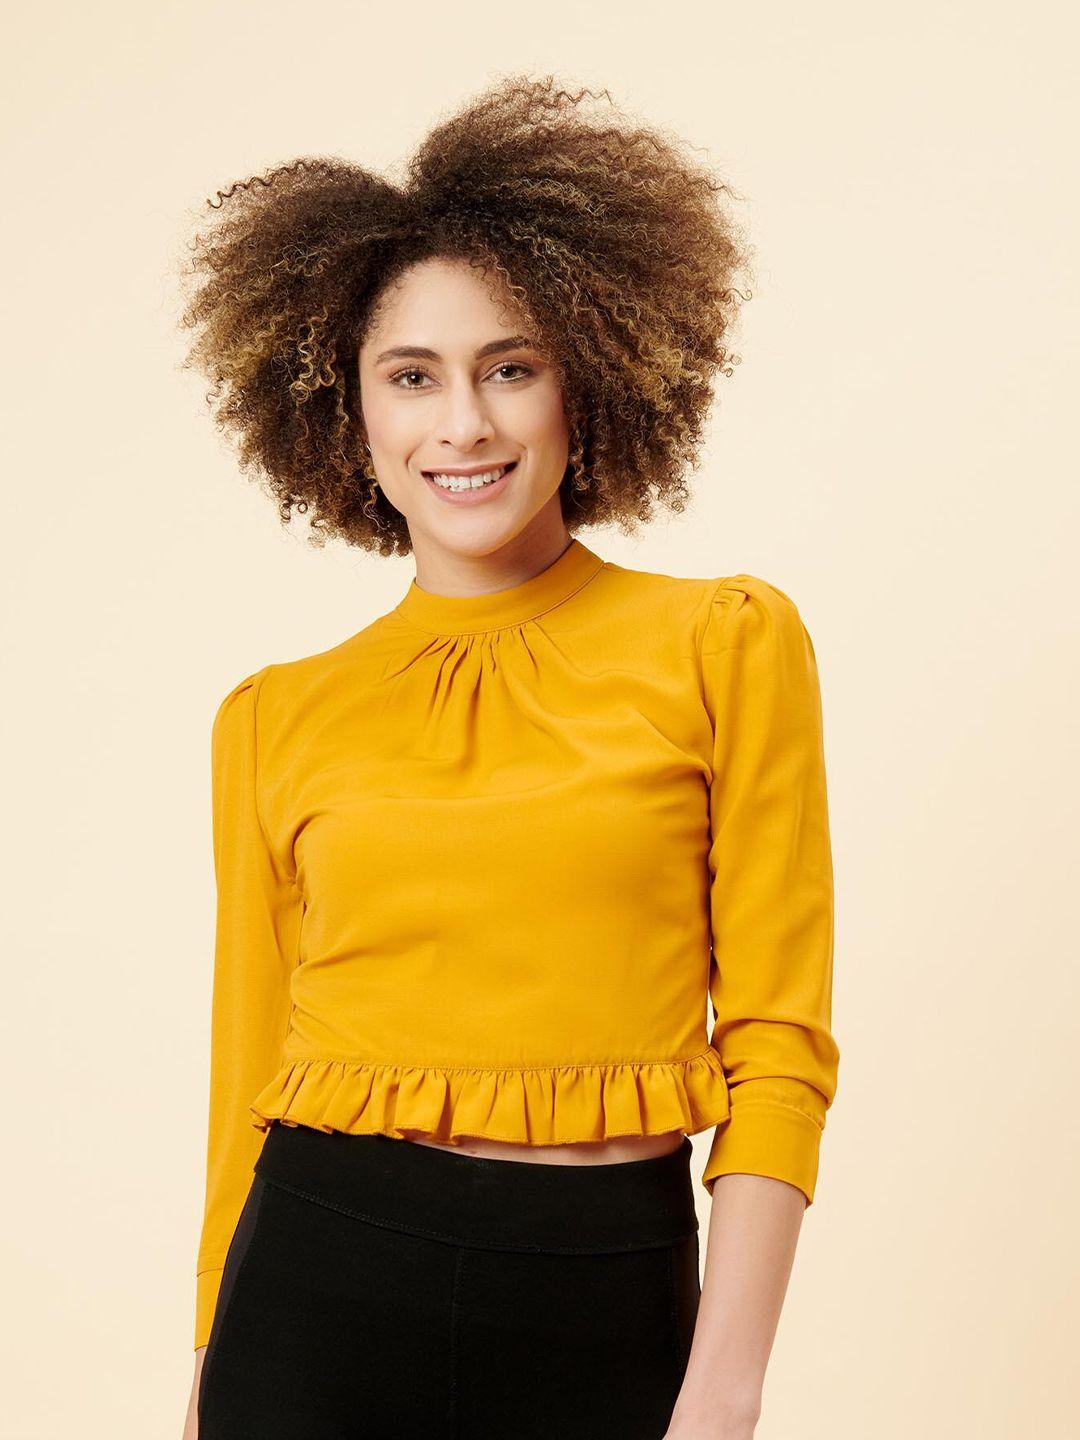 enzeo mustard yellow ruffles styled back crop top